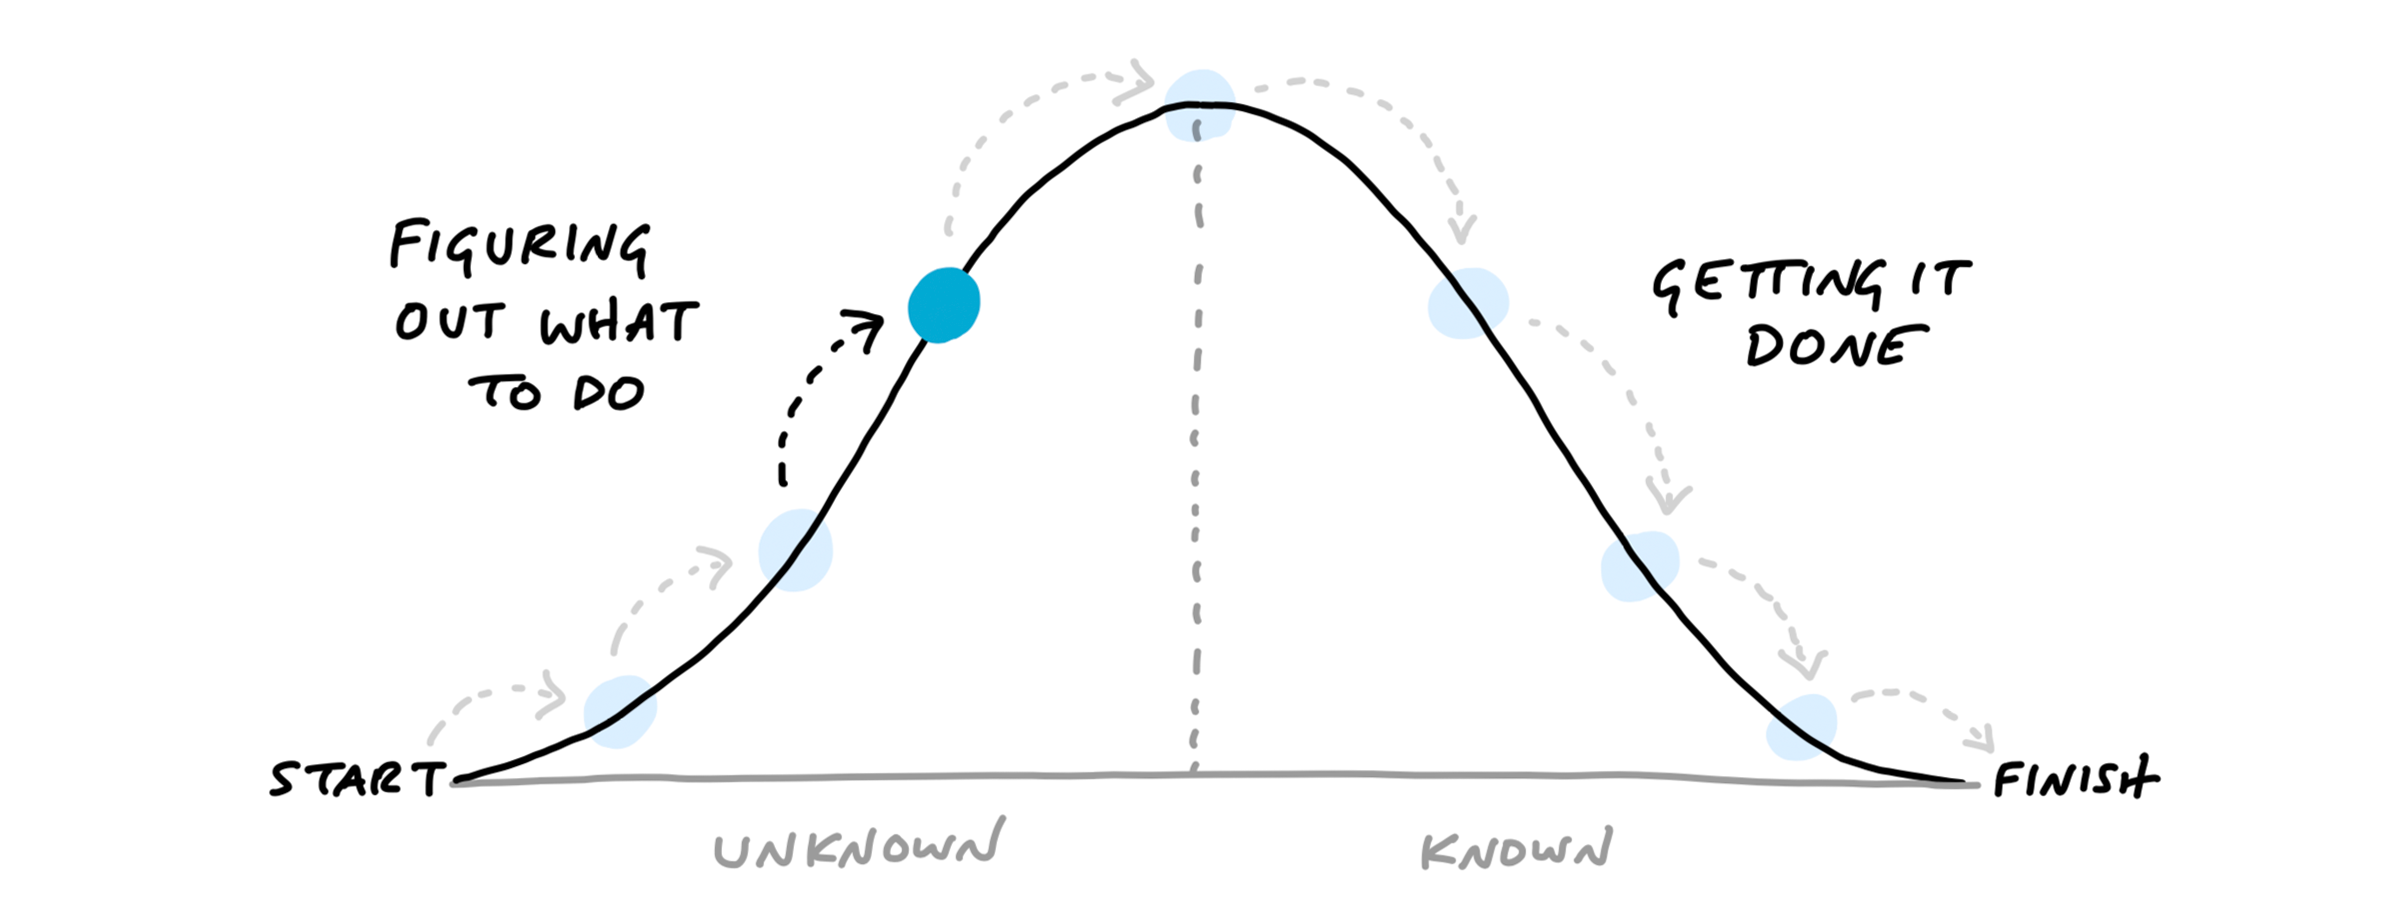 A Hill Chart diagram. It looks like a wide bell curve, with a vertical dotted line down the middle. The far left edge is labeled: Start, and the far right edge labeled: Finish. The left slope going up is labeled: Figuring out what to do. The right slope going down is labeld: Getting it done. A dot is drawn about two-thirds of the way up the left side of the hill. Light-colored arrows suggest the dot originated at the left side, moved up to its current position, and later moves over the hill and down the right to the finish.